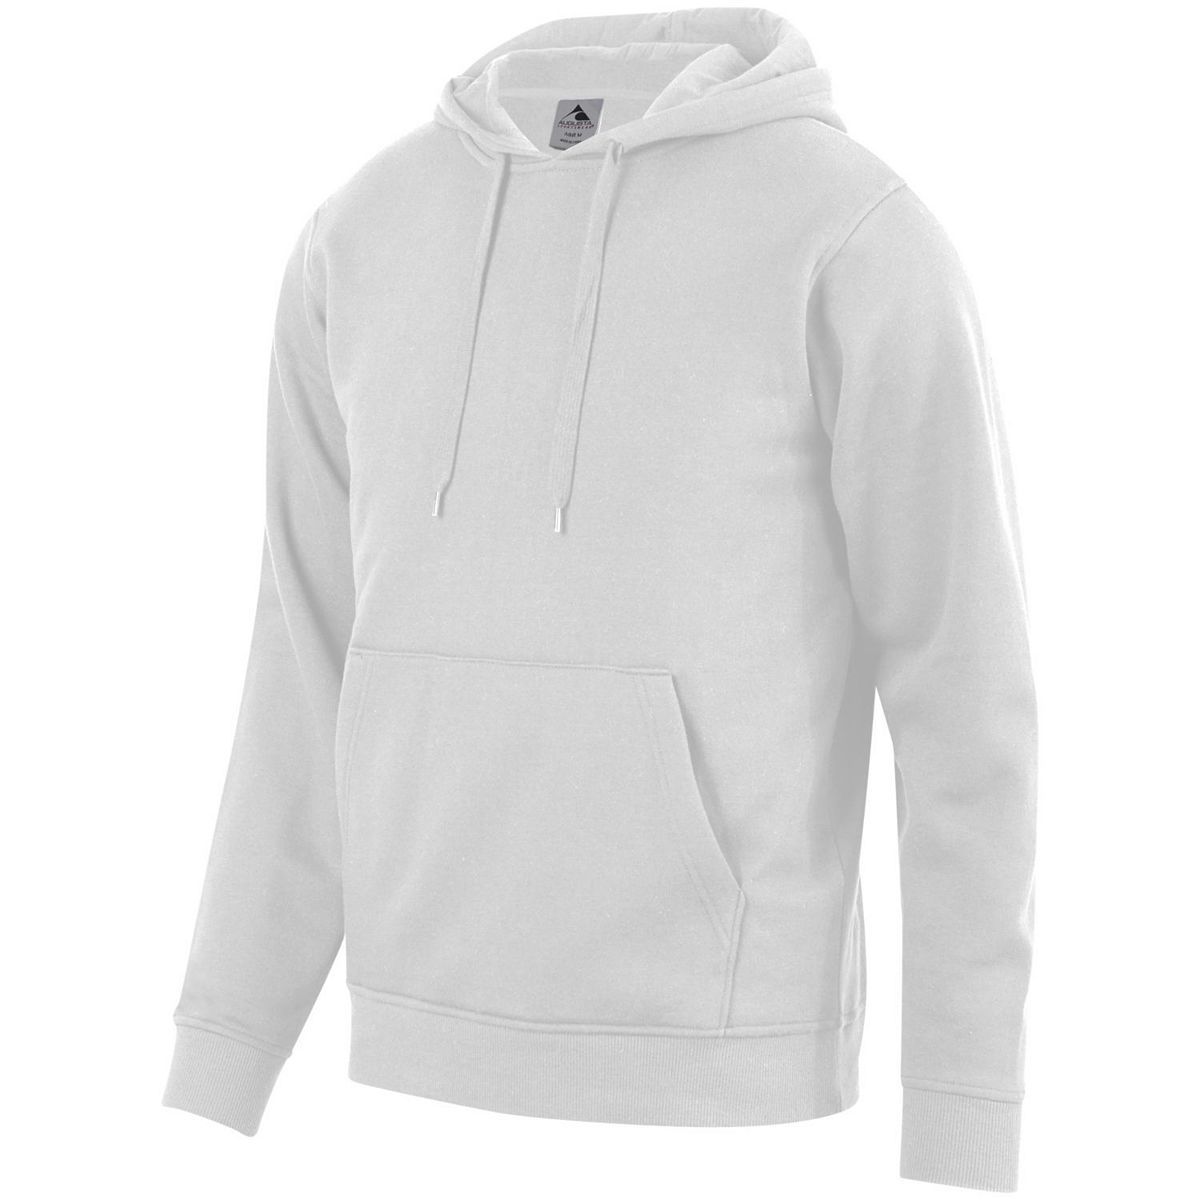 Augusta Sportswear Youth 60/40 Fleece Hoodie in White  -Part of the Youth, Youth-Hoodie, Hoodies, Augusta-Products product lines at KanaleyCreations.com